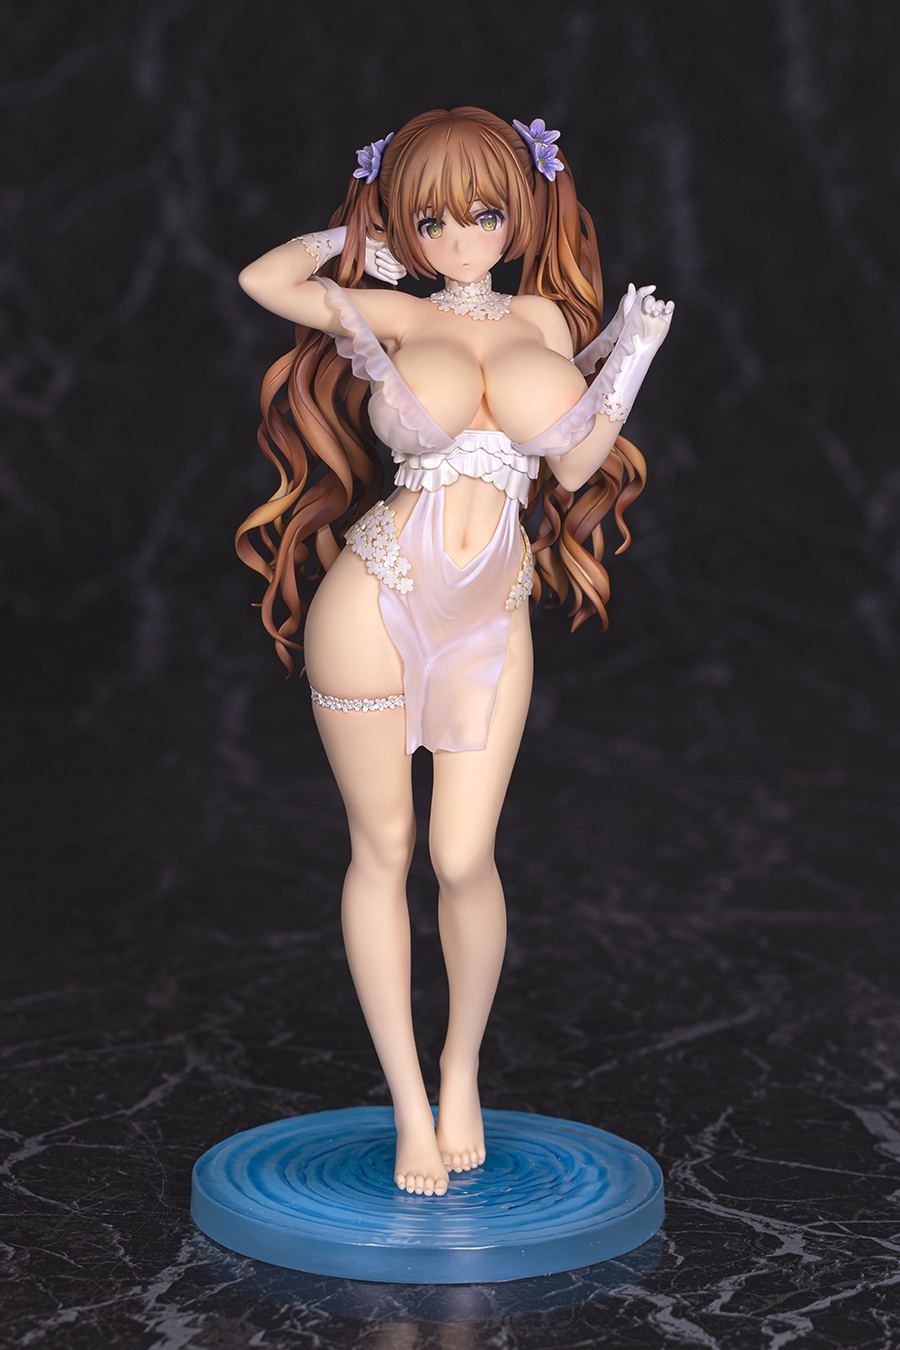 Original Character 1/6 Scale Pre-Painted Figure: Nure Megami Illustration by Mataro Sky Tube